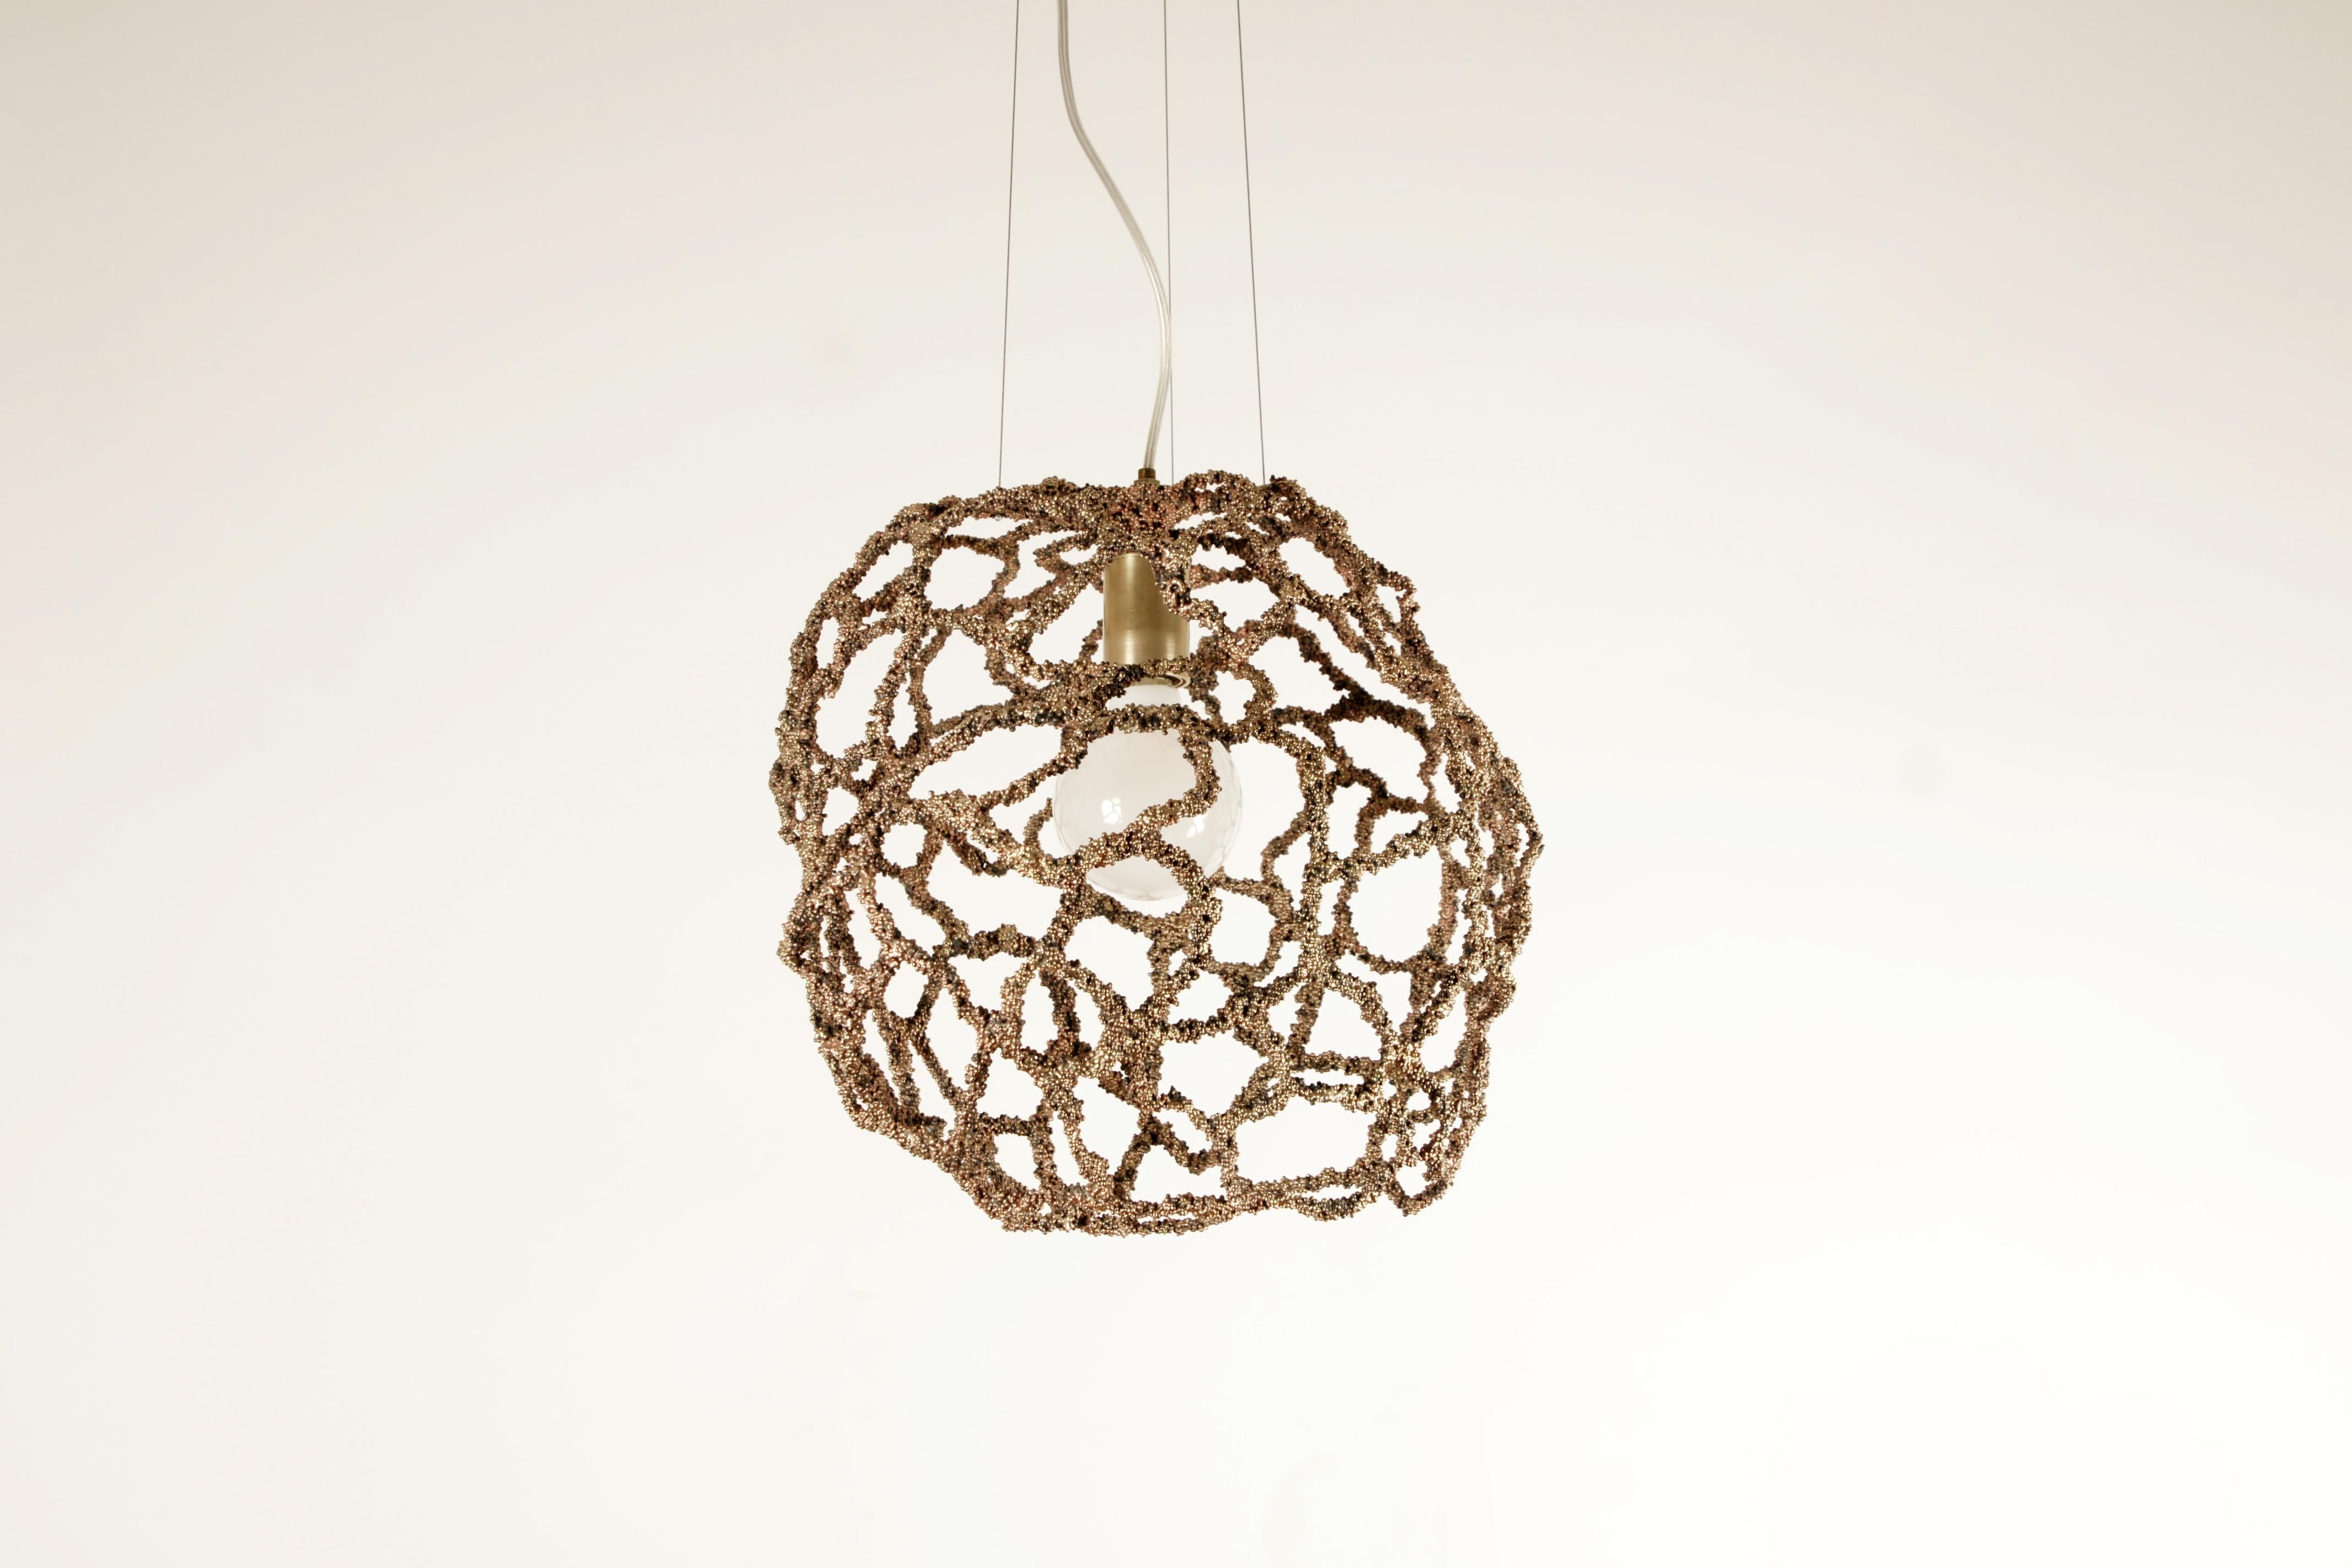 Core pendant light by Johannes Hemann
Material: Steel, brass
Dimensions: Ø 35 x H 48 cm

Just like the universe is made from smallest parts, the atoms, Core has been built from small beads. It is an experiment to see how small parts can built a